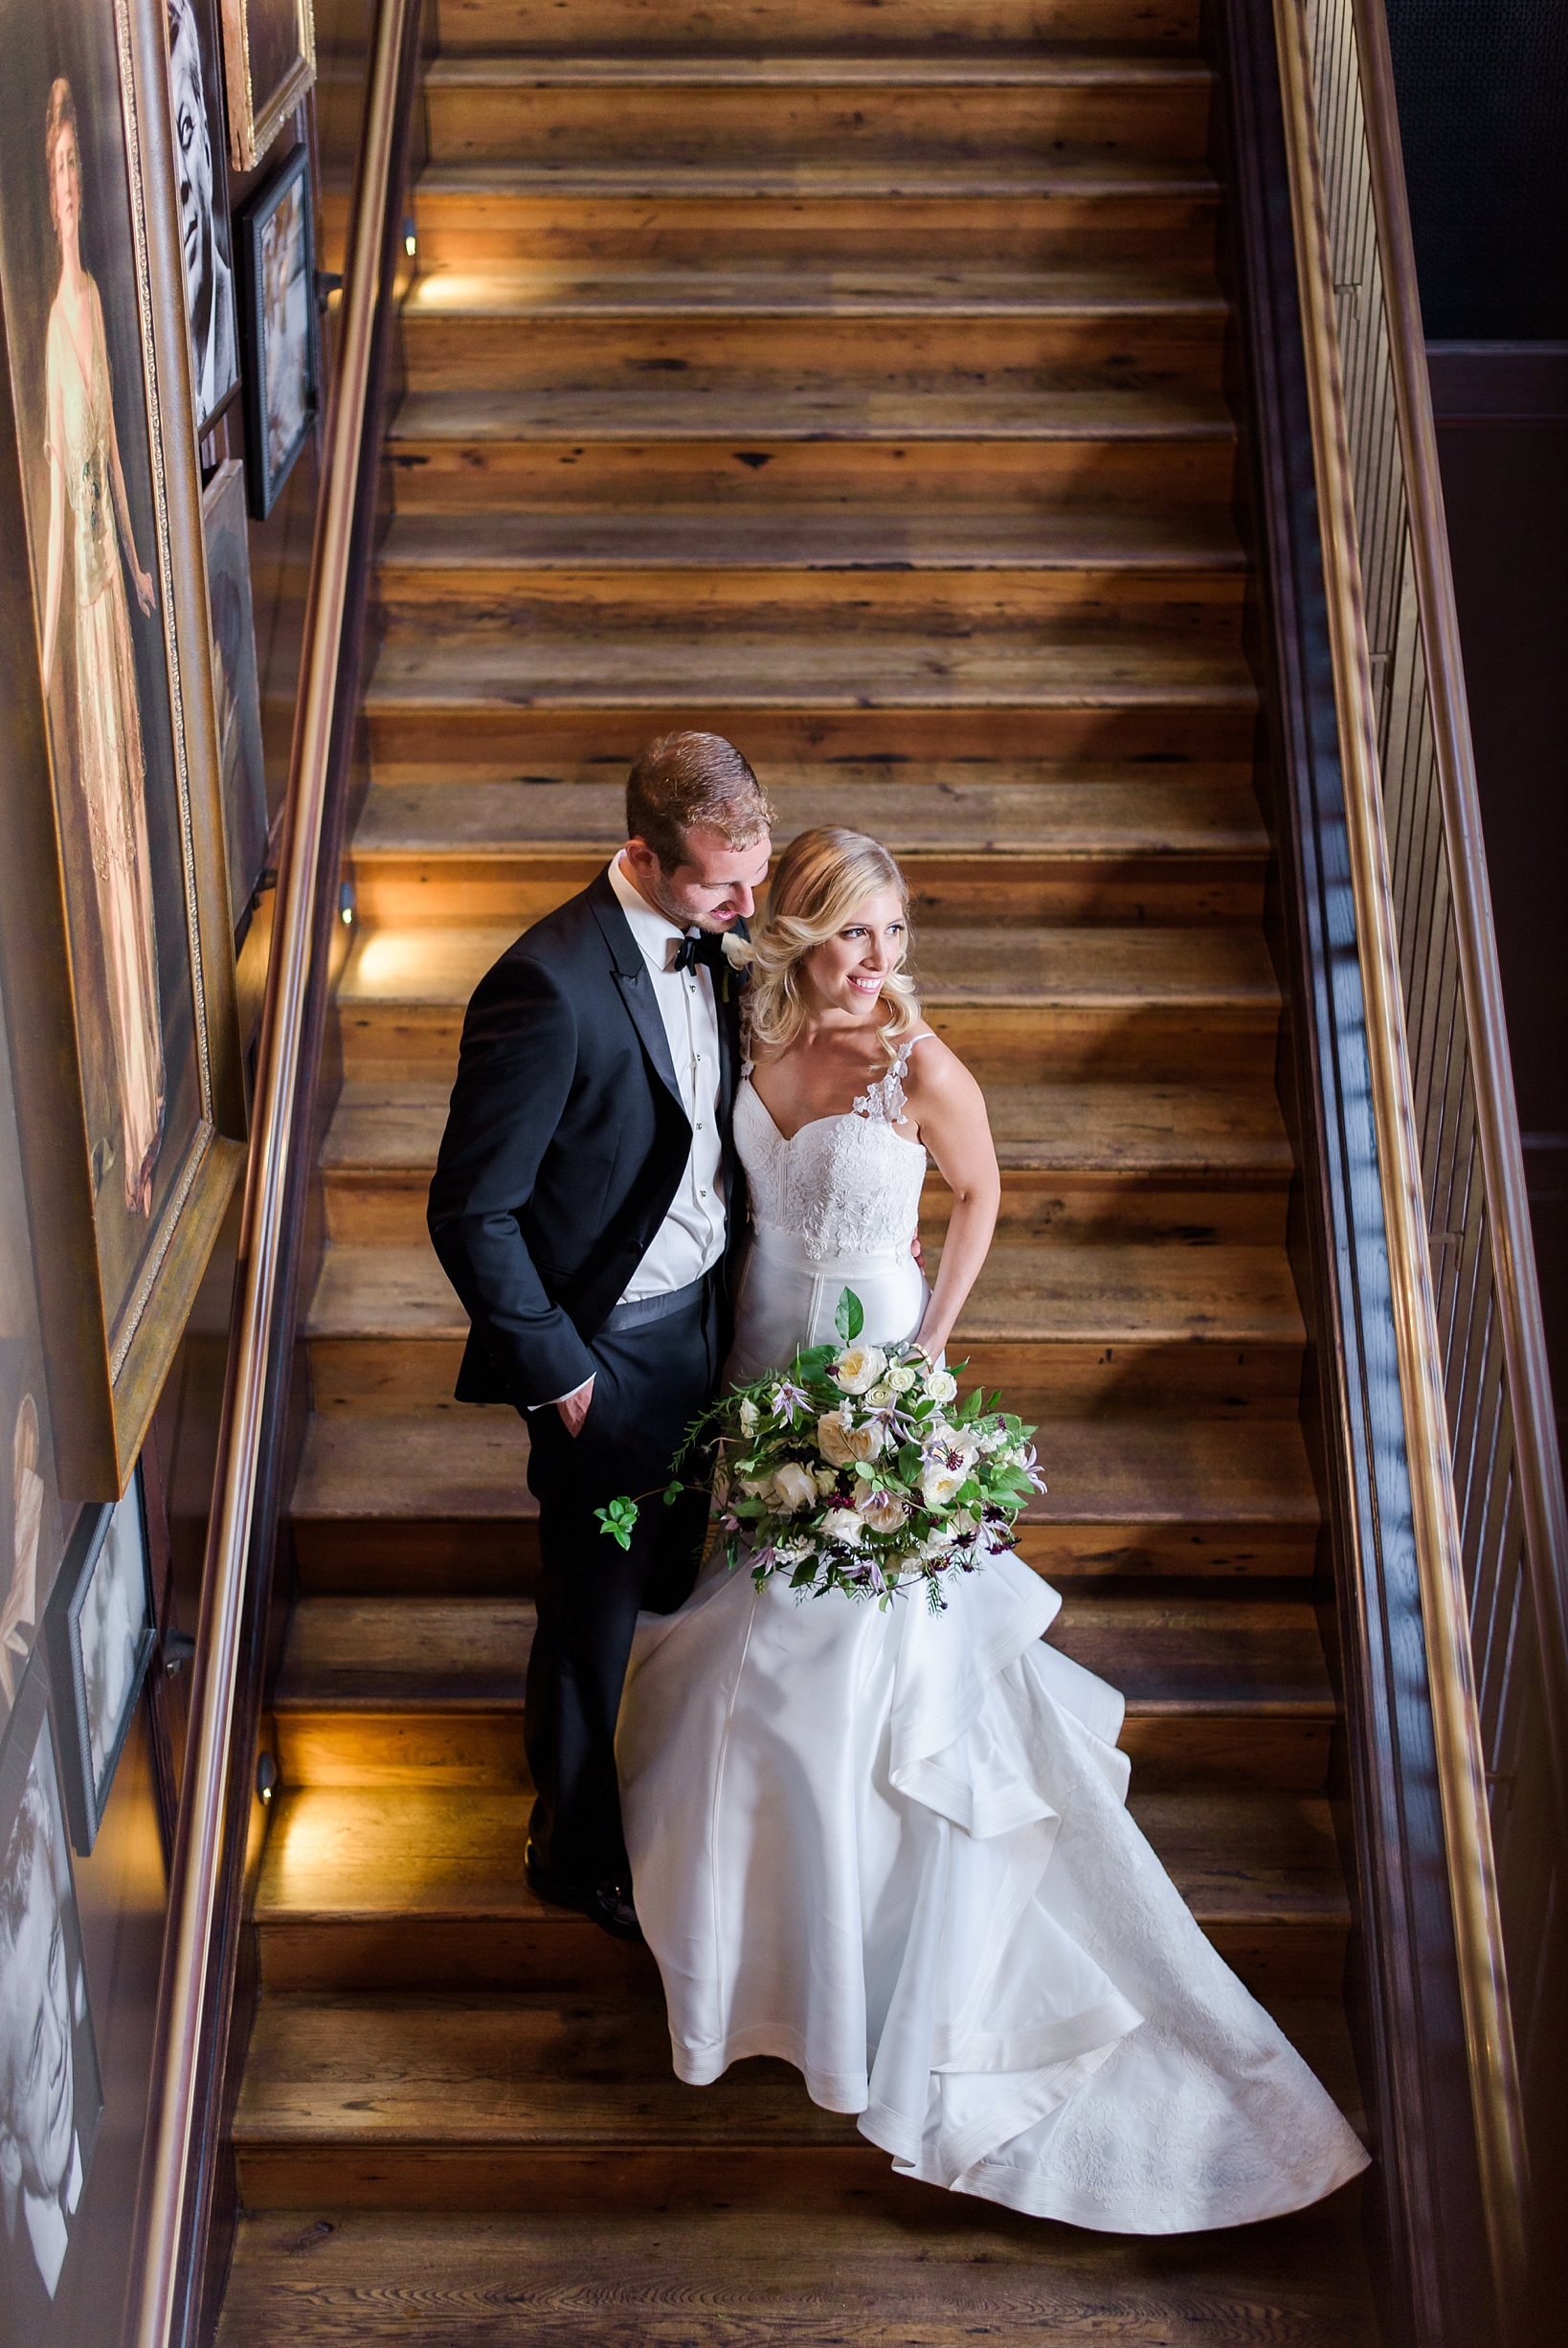 Arial picture of the Bride and Groom on the wooden steps of the Oxford Exchange, FL